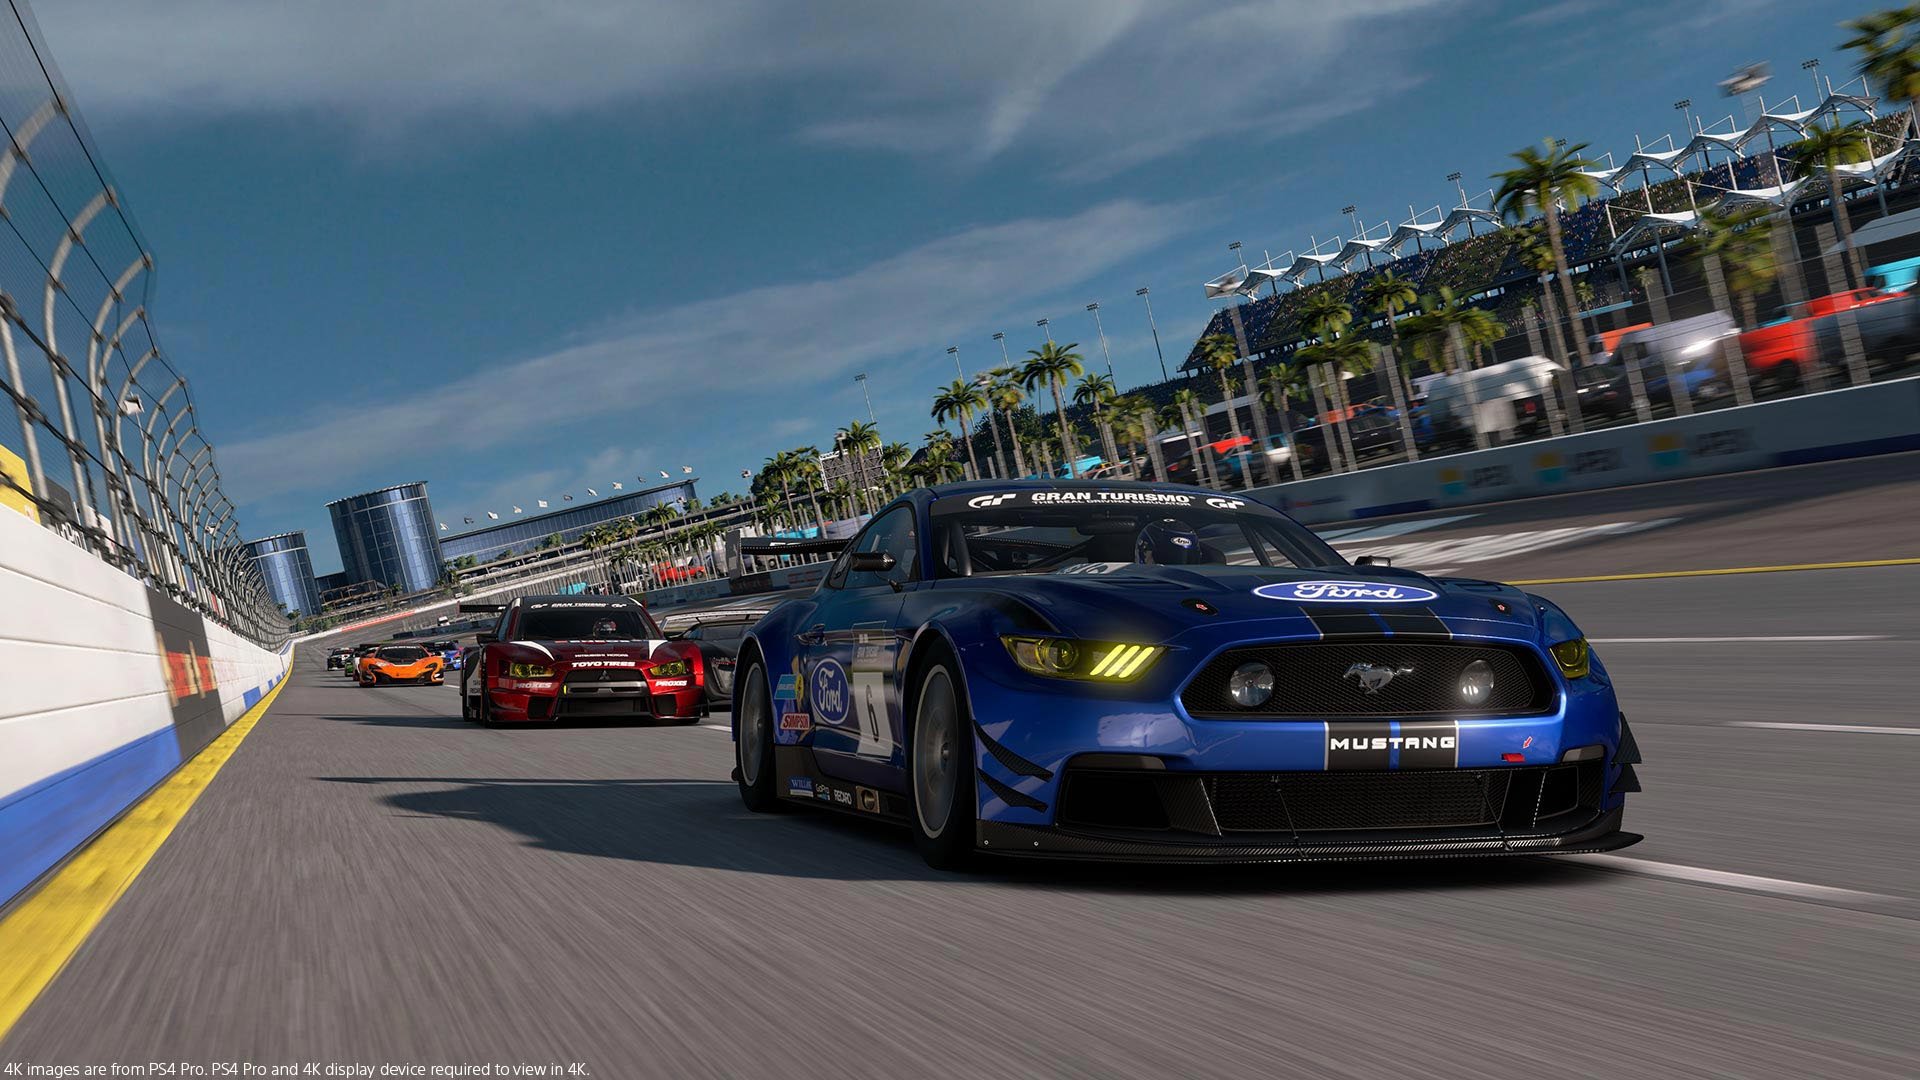 How to access online multiplayer in Gran Turismo 7